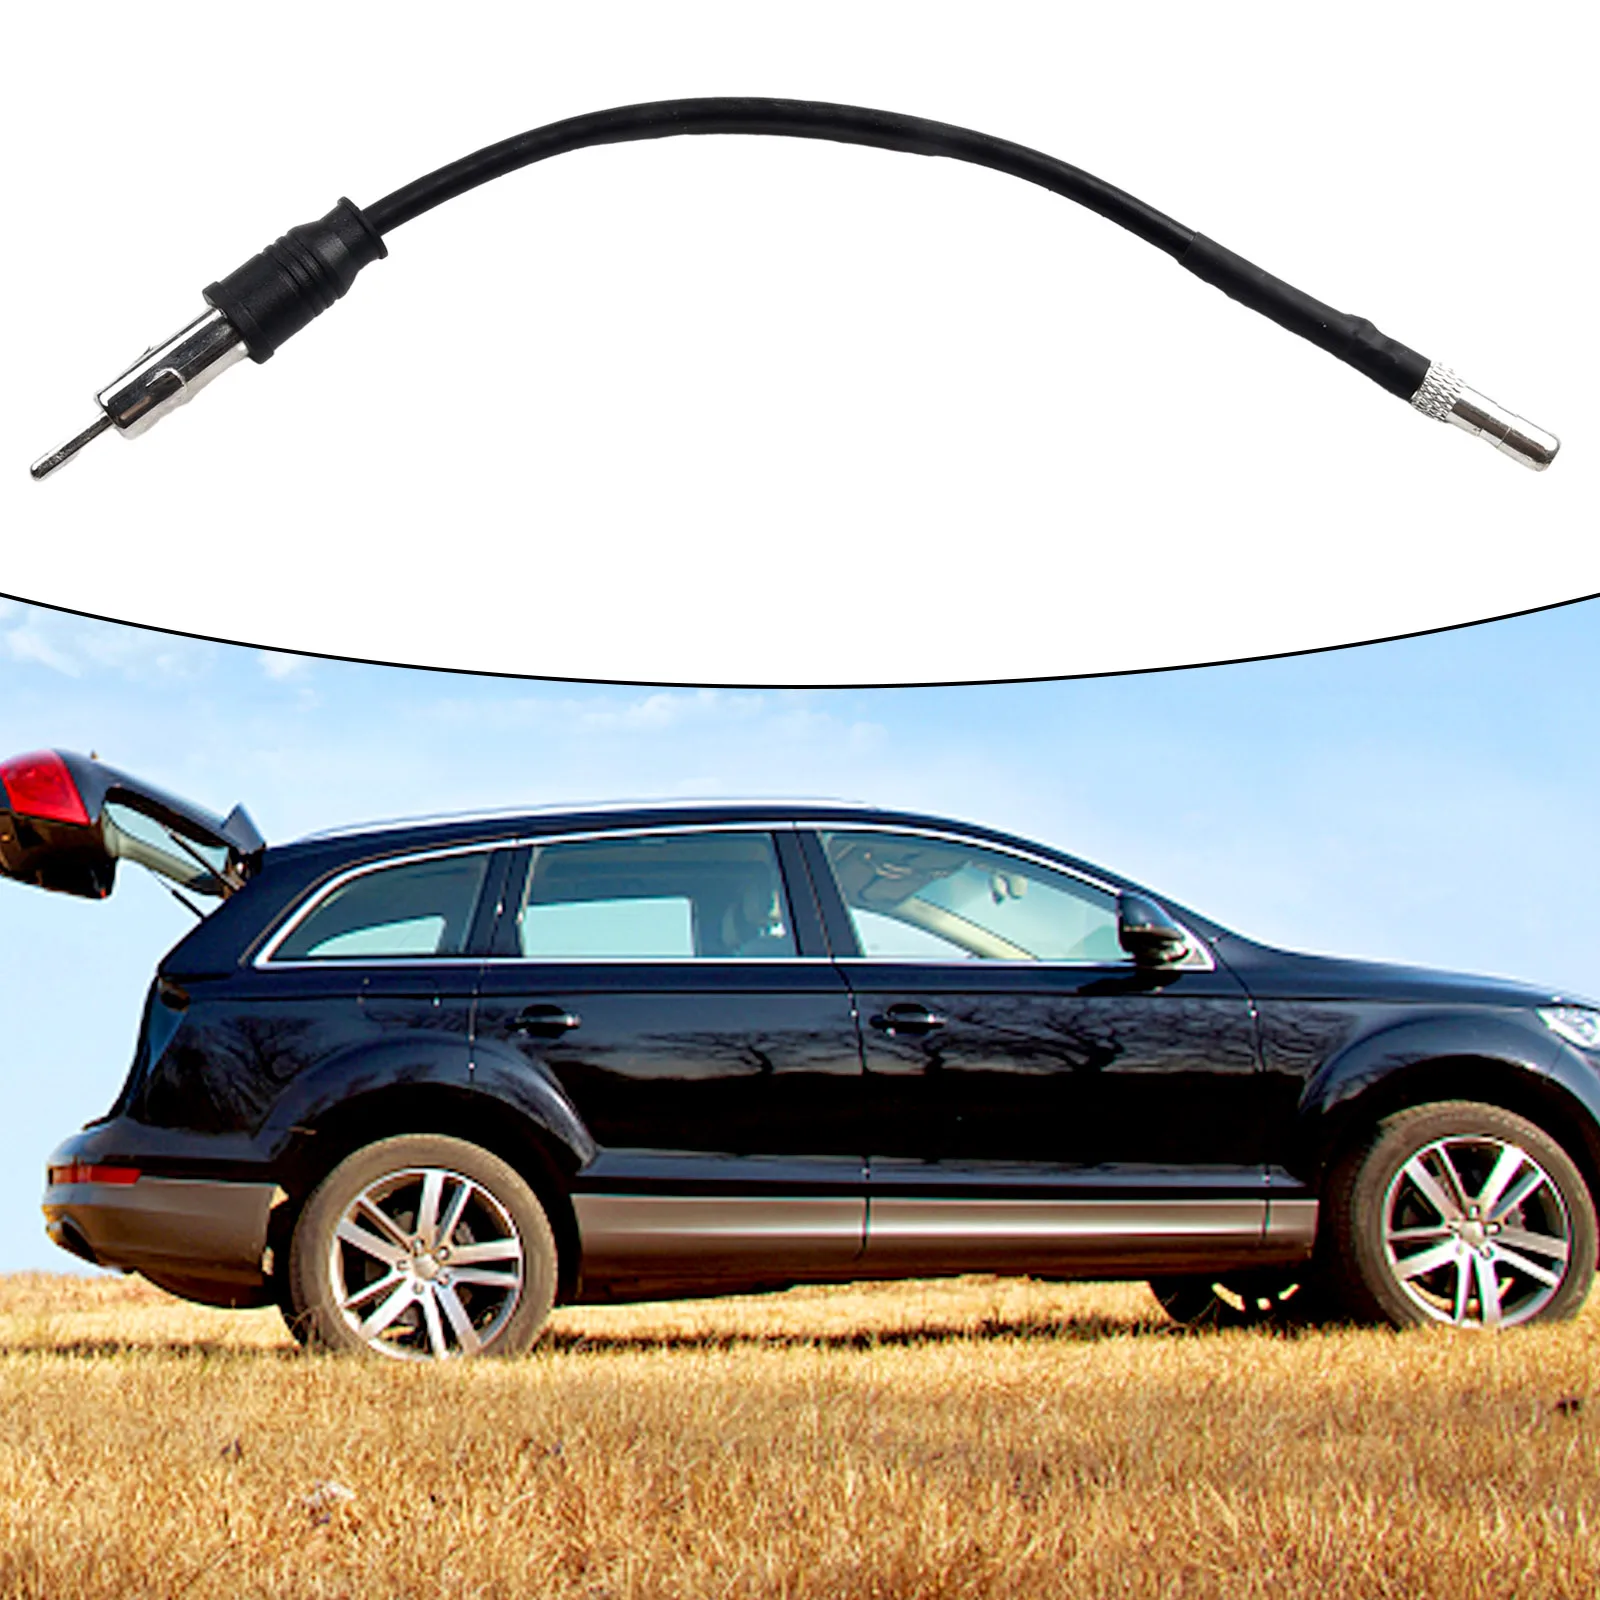 

1pcs Car Radio Stereo Antenna Adapter-Plug For Chevrolet For Chrysler For Dodge Black Exterior Parts Aerials